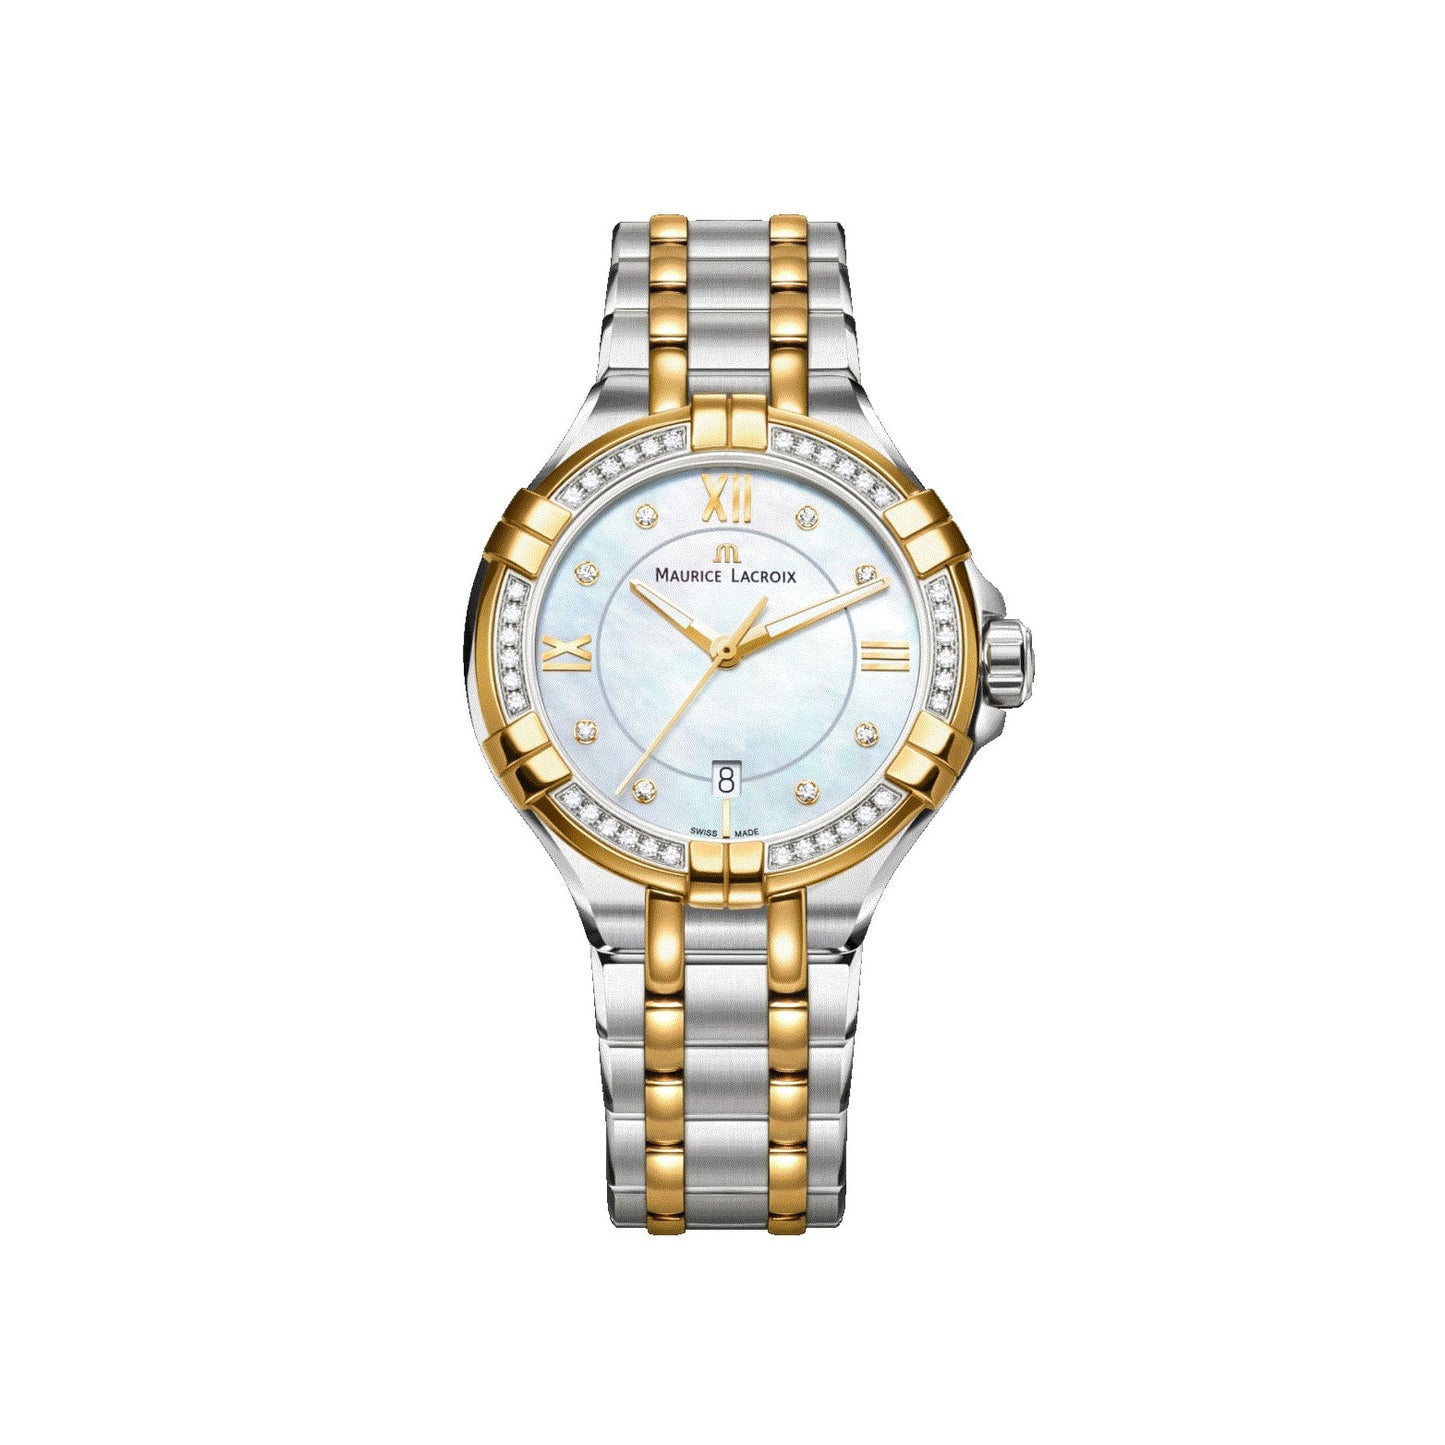 Maurice Lacroix Stainless Steel Aikon Womens Watch